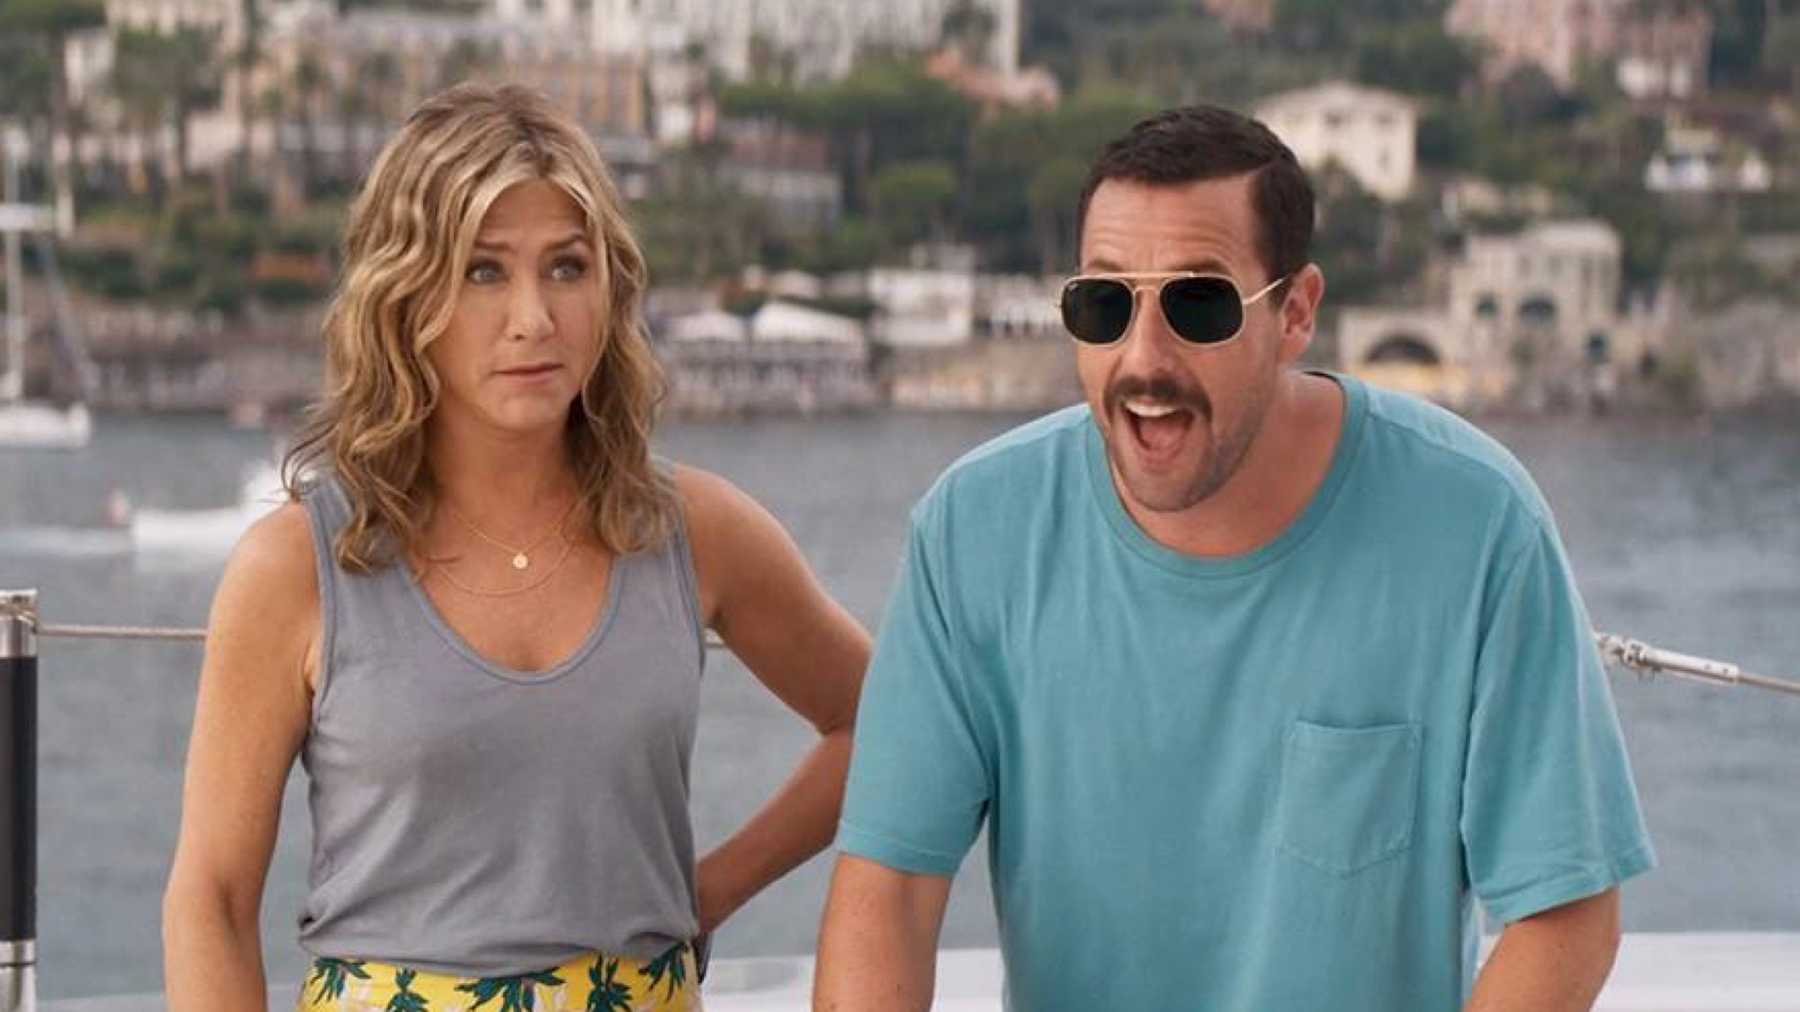 The Daily Crate | Let's Talk About Adam Sandler's Murder Mystery, Guys